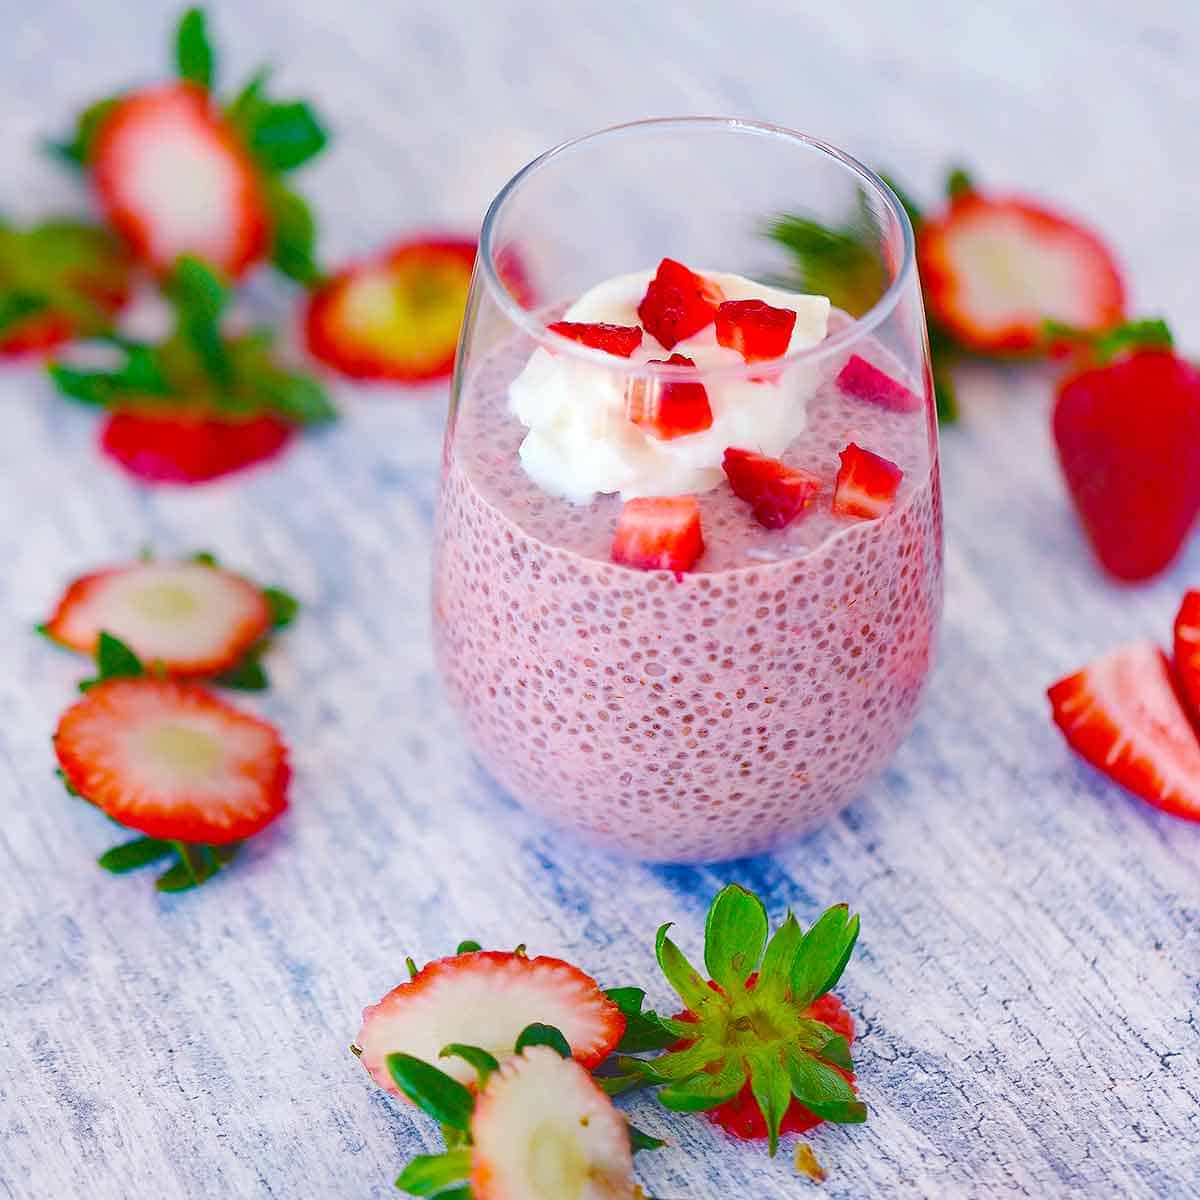 Chia Seed Pudding (with Strawberries, or other fruit) - Bowl of Delicious